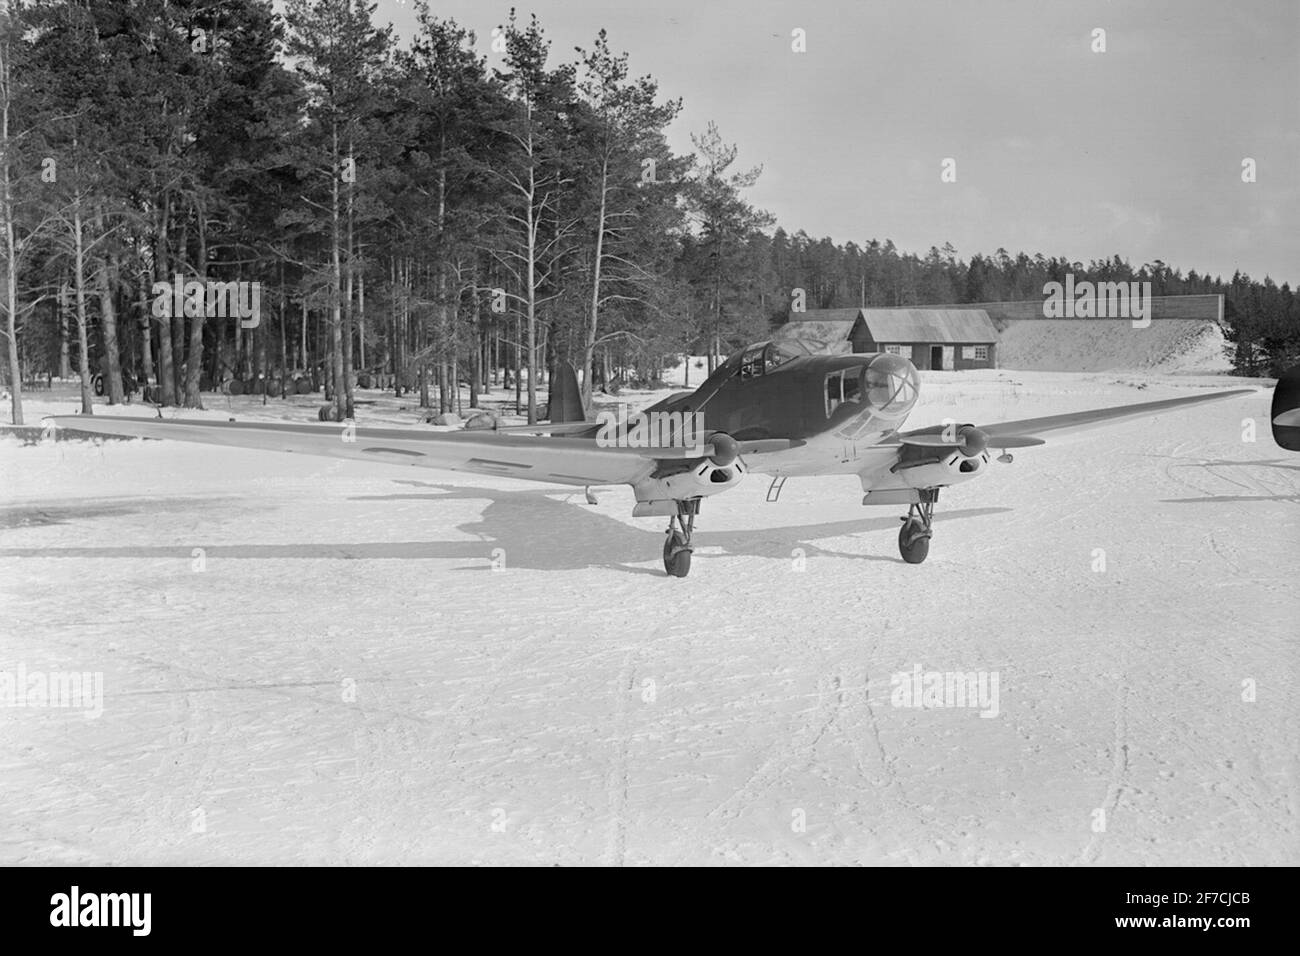 Pharmacies Airplane type P 6, 1944  Pharmacoret's aircraft Type P 6 with registration designation SE-KAC, winter time..plane seen from the front. Stock Photo